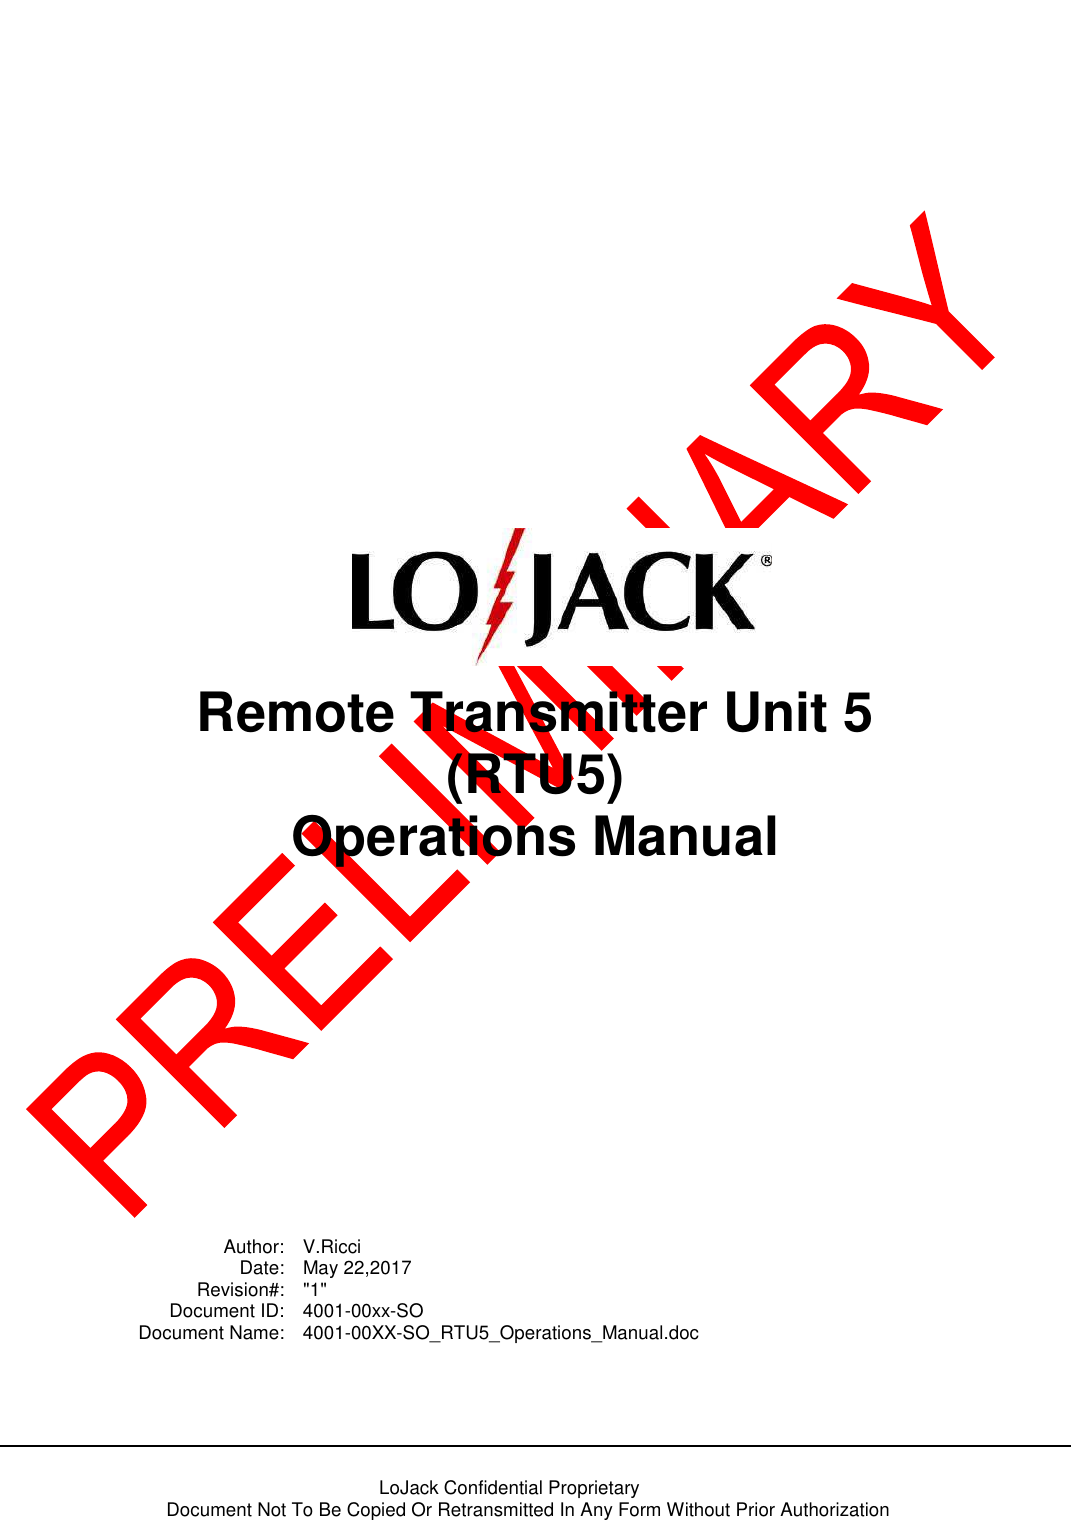     LoJack Confidential Proprietary  Document Not To Be Copied Or Retransmitted In Any Form Without Prior Authorization                  Remote Transmitter Unit 5 (RTU5) Operations Manual            Author:  V.Ricci   Date:  May 22,2017   Revision#:  &quot;1&quot;   Document ID:  4001-00xx-SO   Document Name:  4001-00XX-SO_RTU5_Operations_Manual.doc  